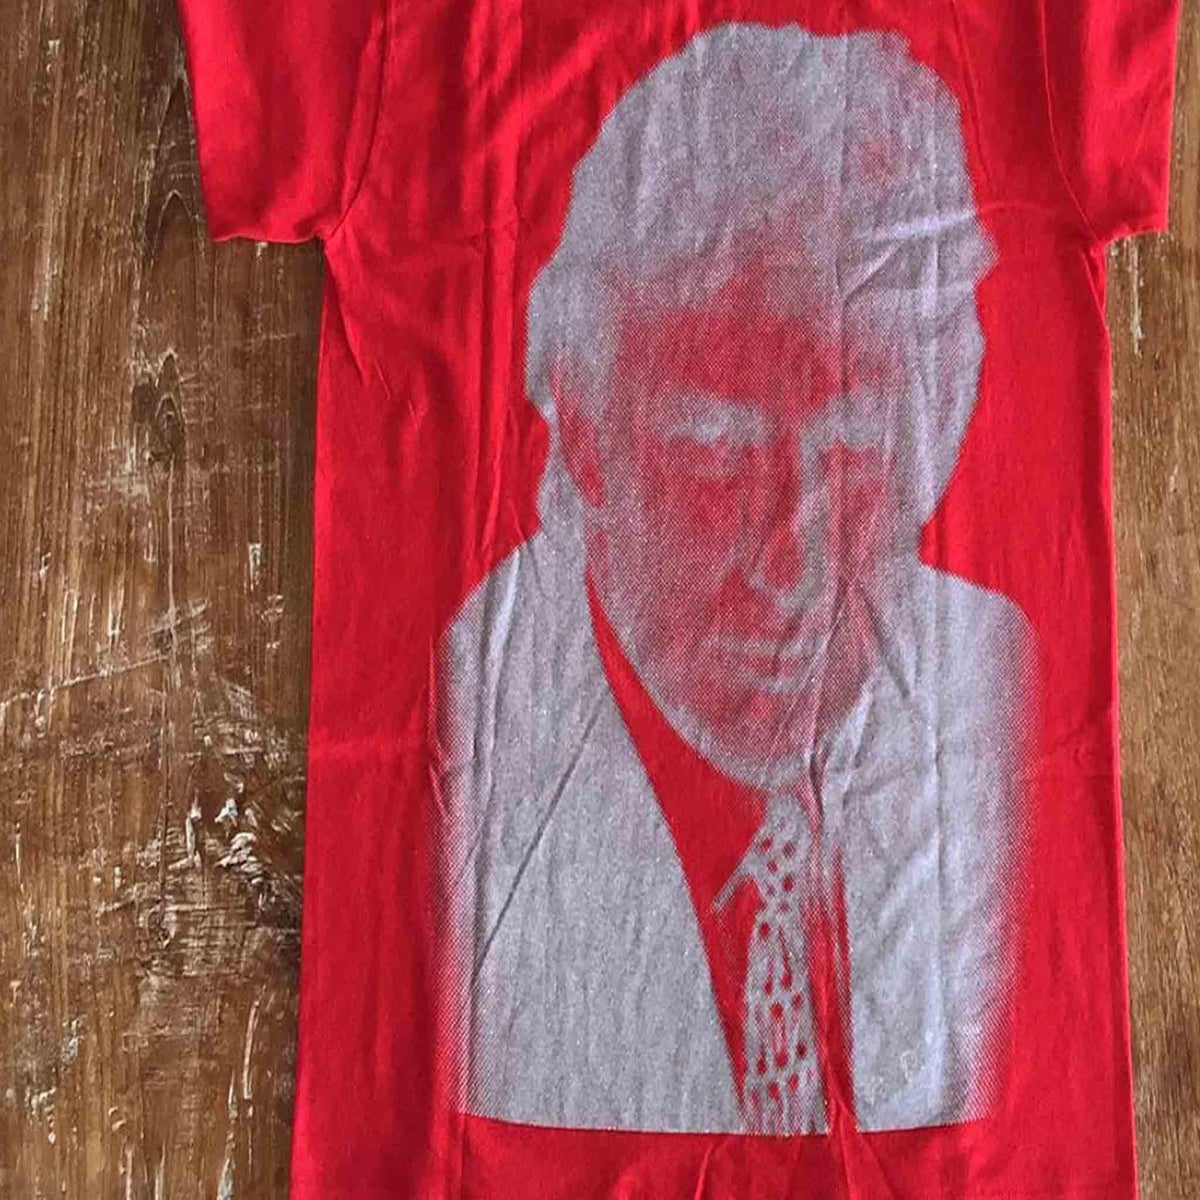 Supreme t-shirt featuring image of Donald Trump has sold for $23k, The  Independent